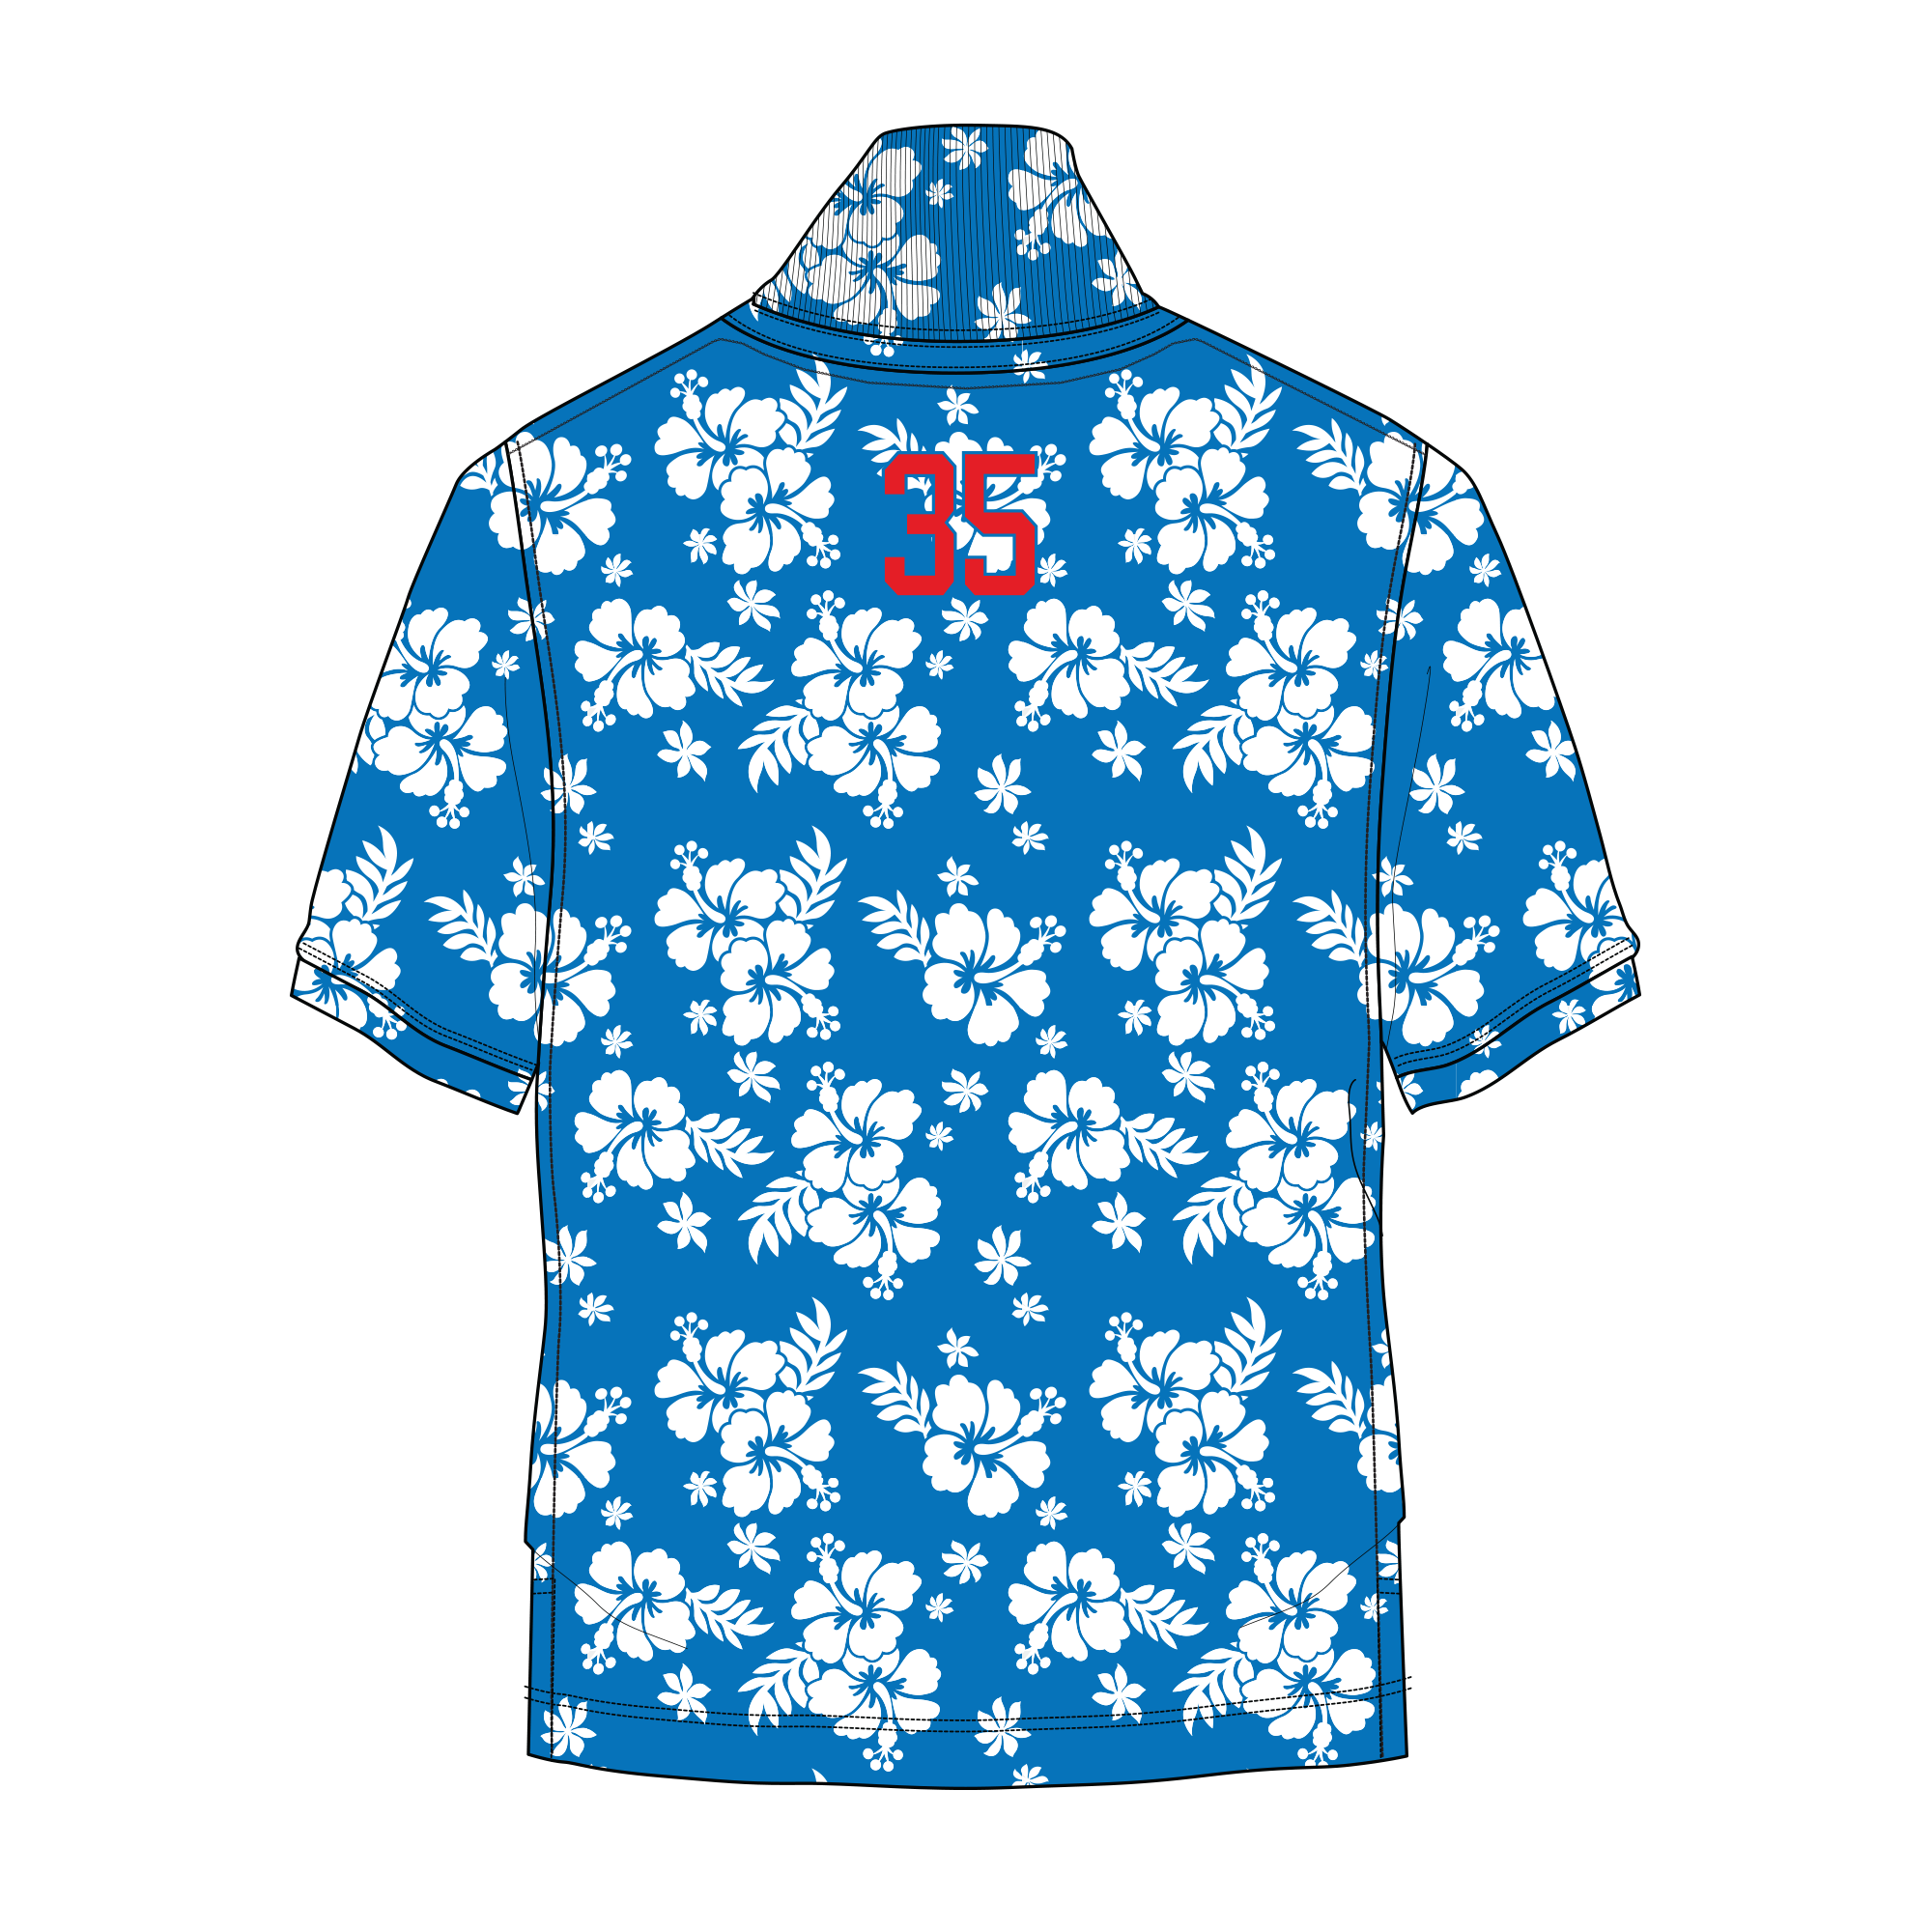 Dodgers Hawaiian Shirt White Hibiscus Tropical Leaves Los Angeles Dodgers  Gift - Personalized Gifts: Family, Sports, Occasions, Trending